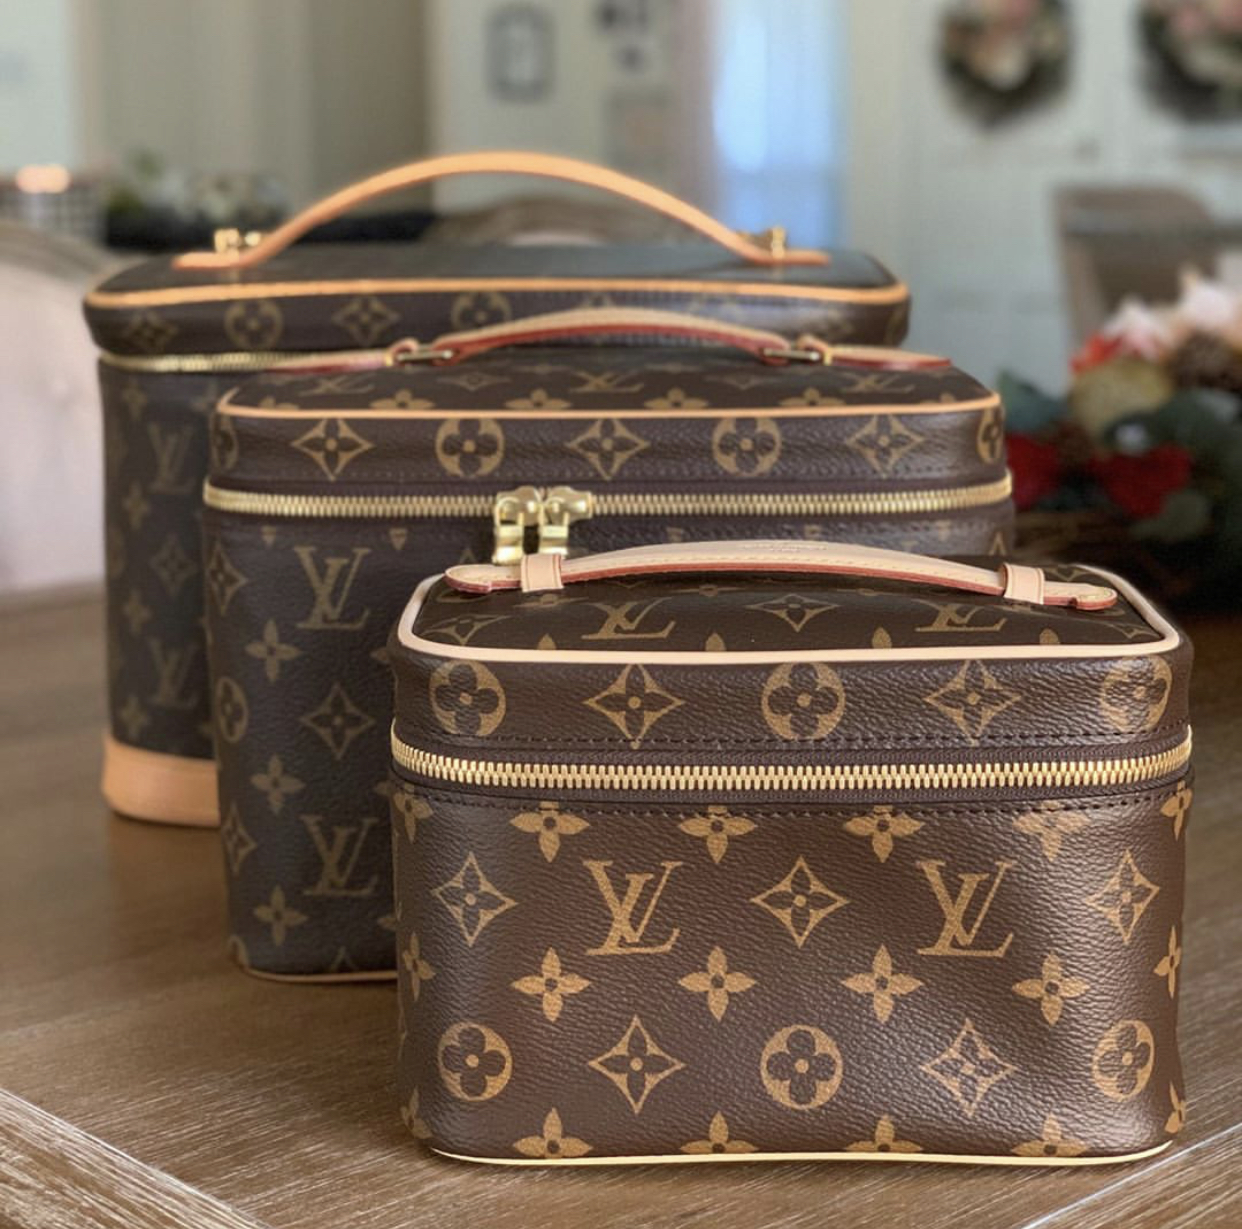 Louis Vuitton Nice Vanity Price List and - Brands Blogger